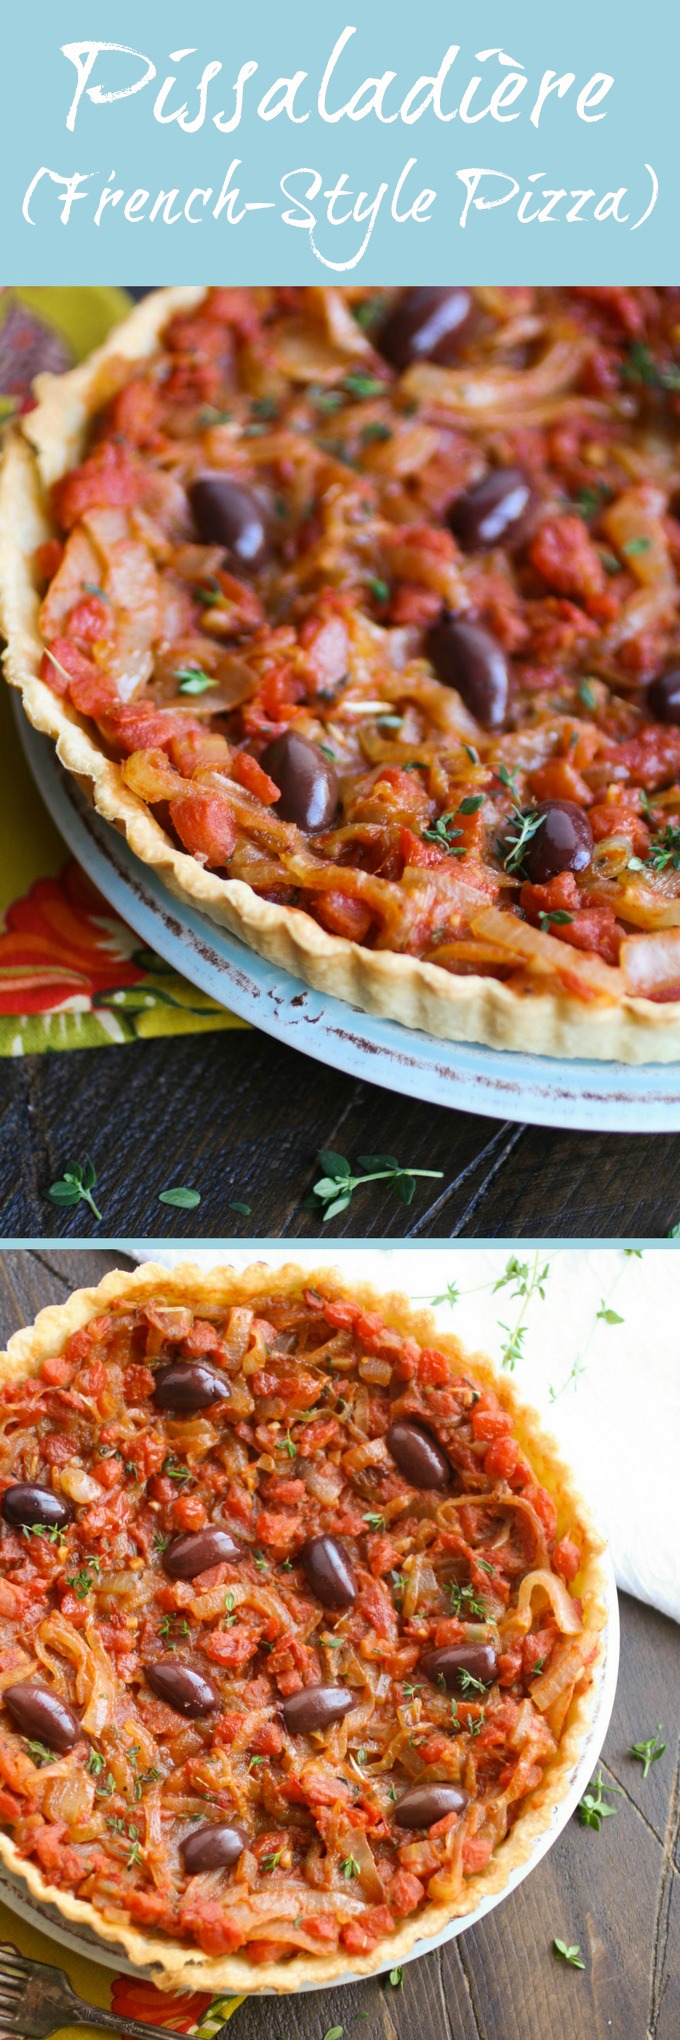 Pissaladière (French-style pizza) should be on the list for your next gathering! This makes a wonderful starter!